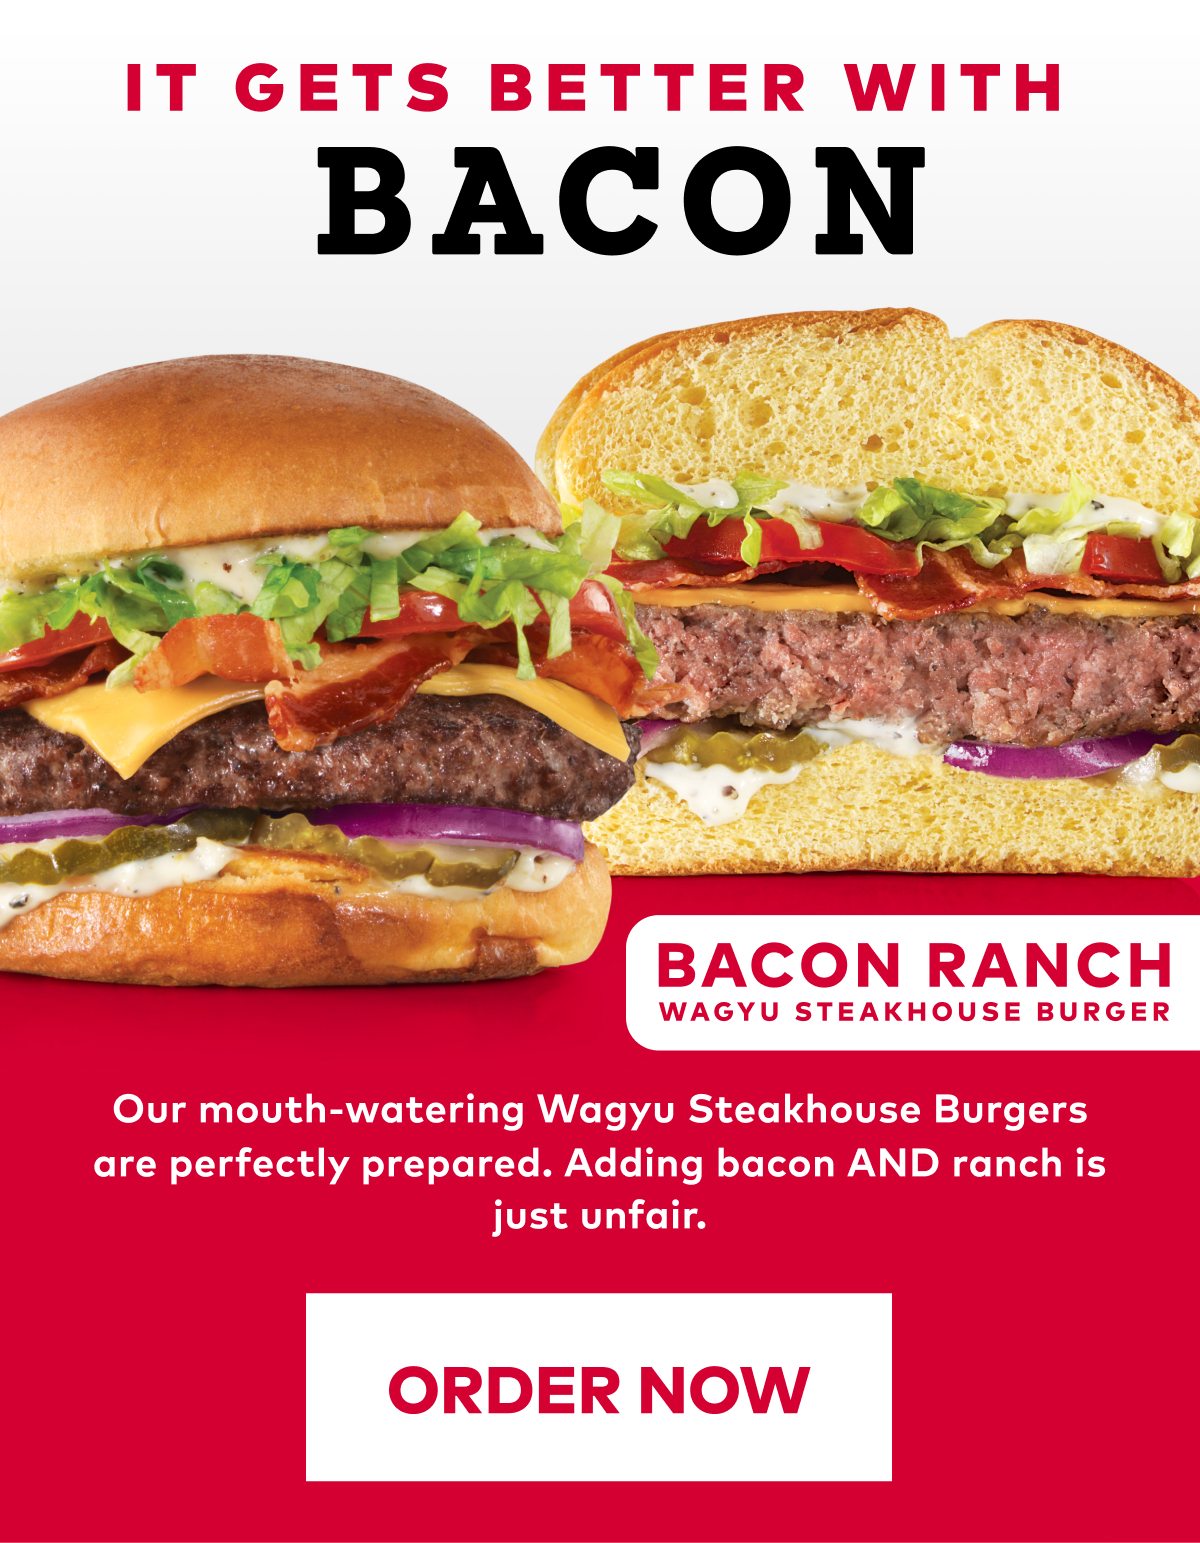 Take it to the next level with the Bacon Ranch Wagyu Steakhouse Burger